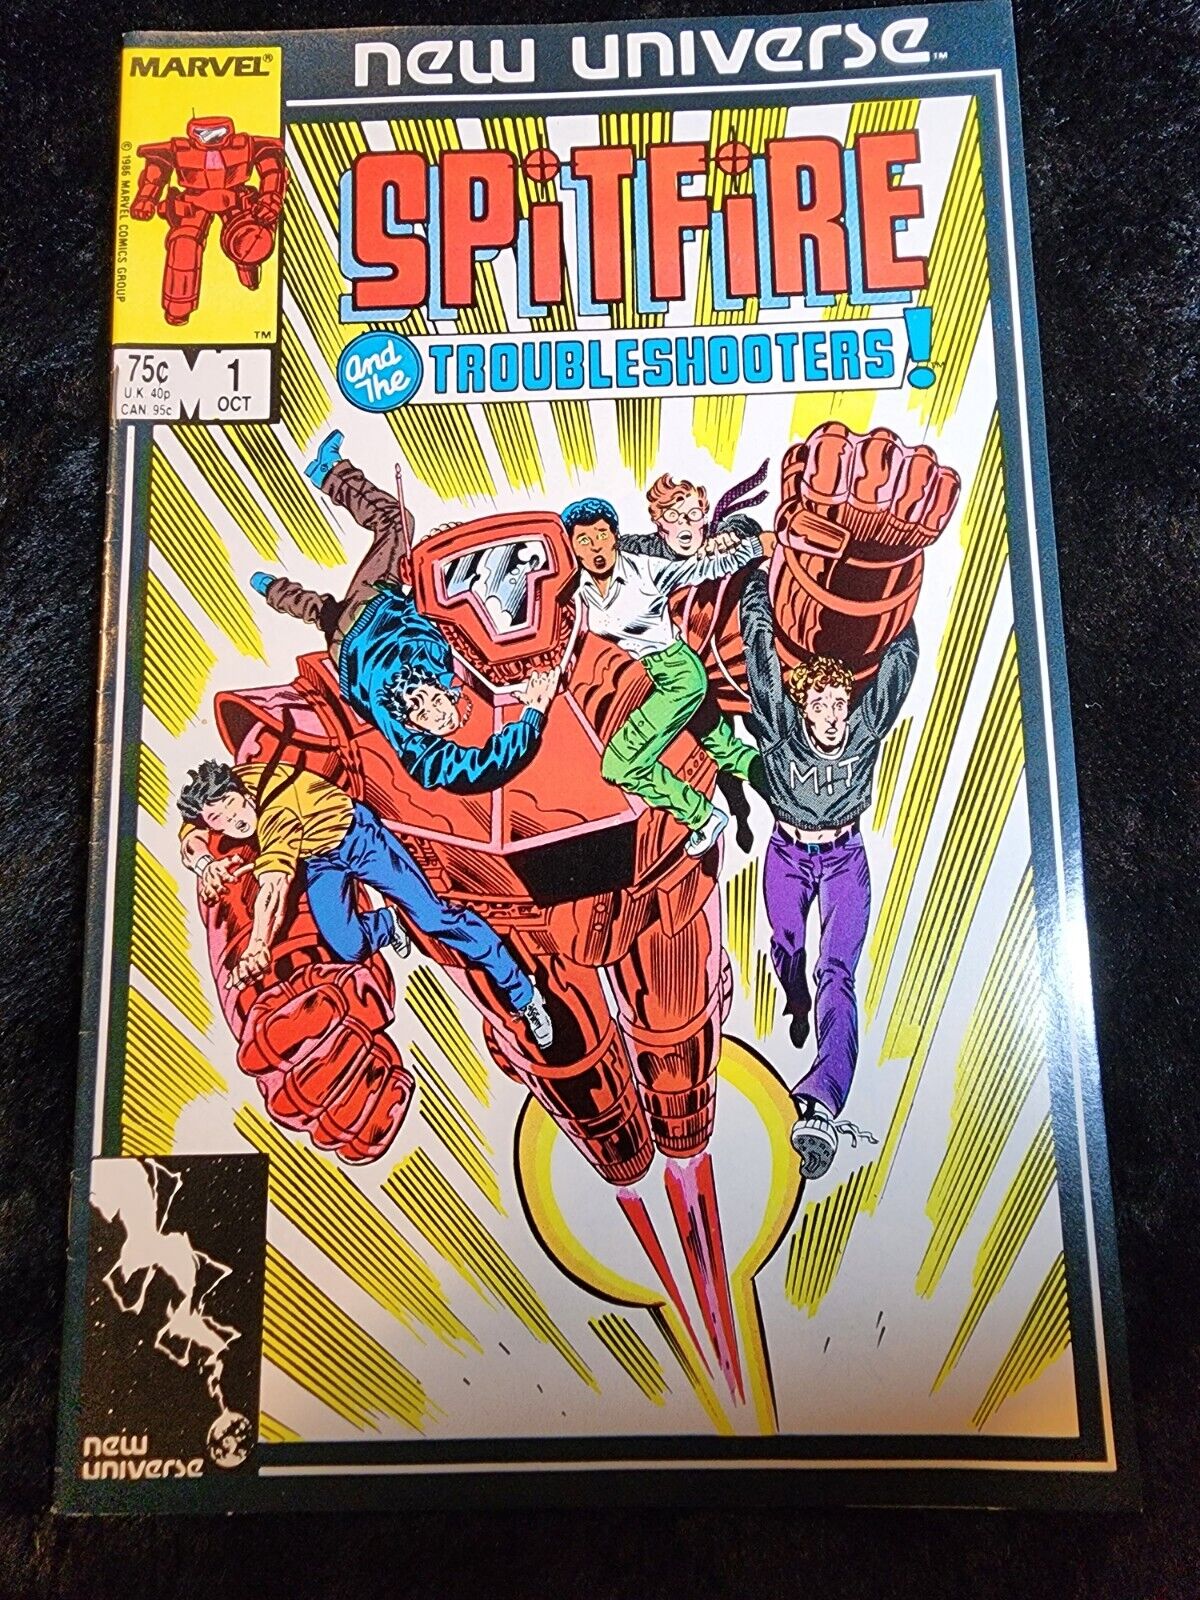 Spitfire and the Troubleshooters #1 (Marvel Comics October 1986)